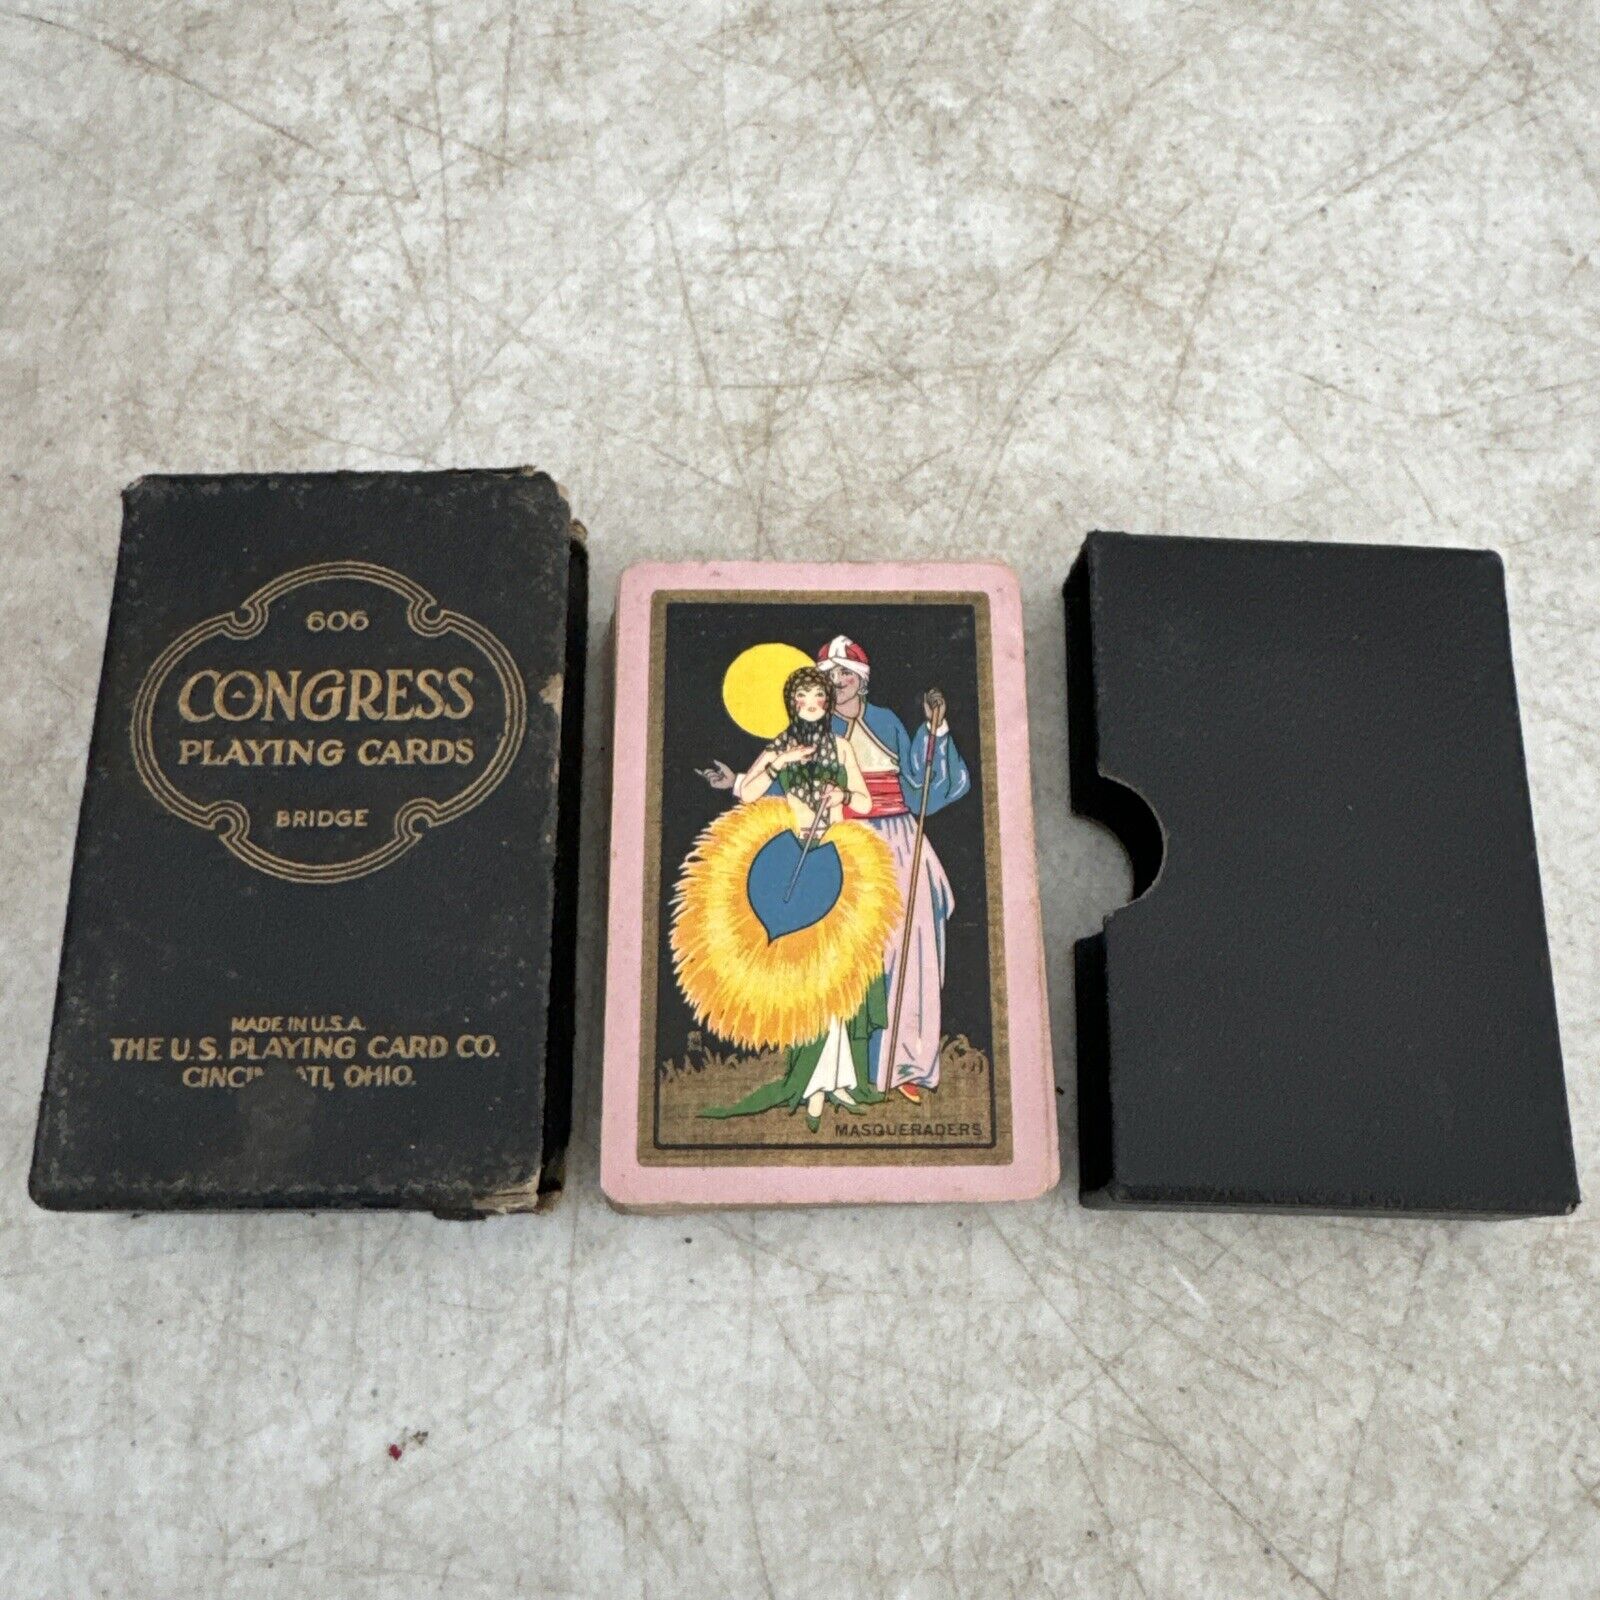 ANTIQUE CONGRESS PLAYING CARDS NO. 606 Masqueraders